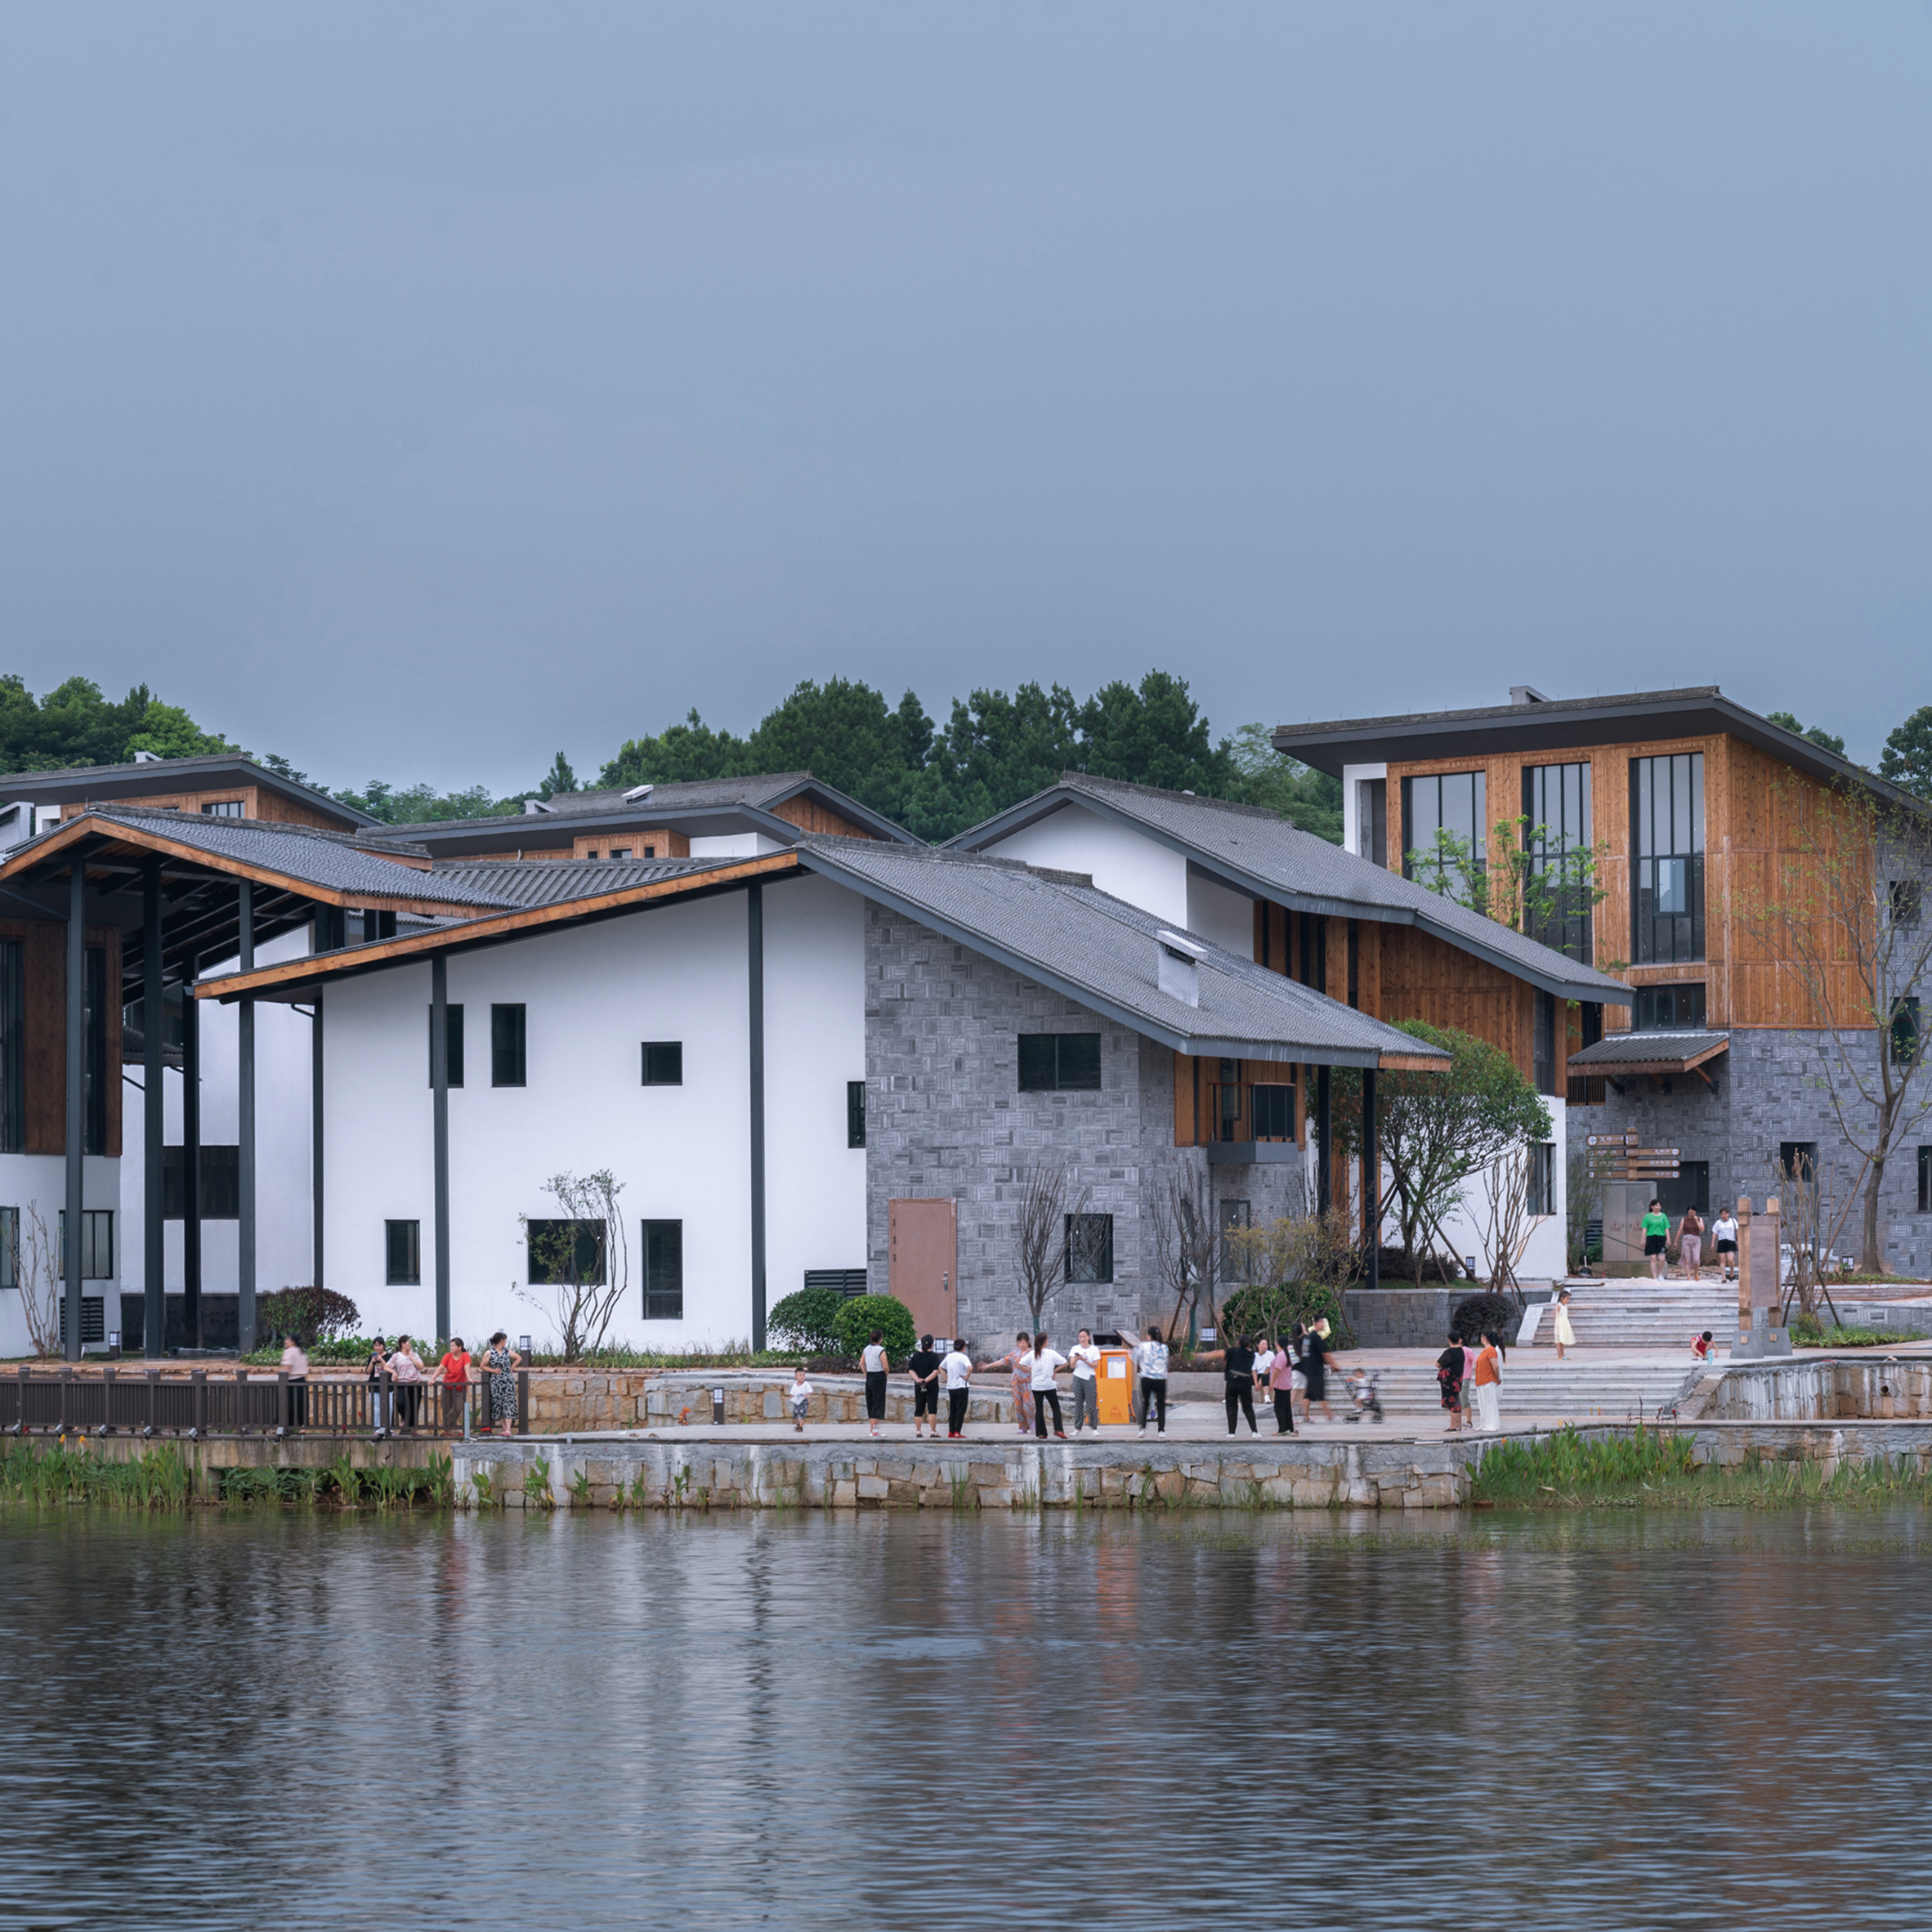 Mi Luo City Duan Wu Community Villager Relocating Project by Zaozuo Architecture Studio